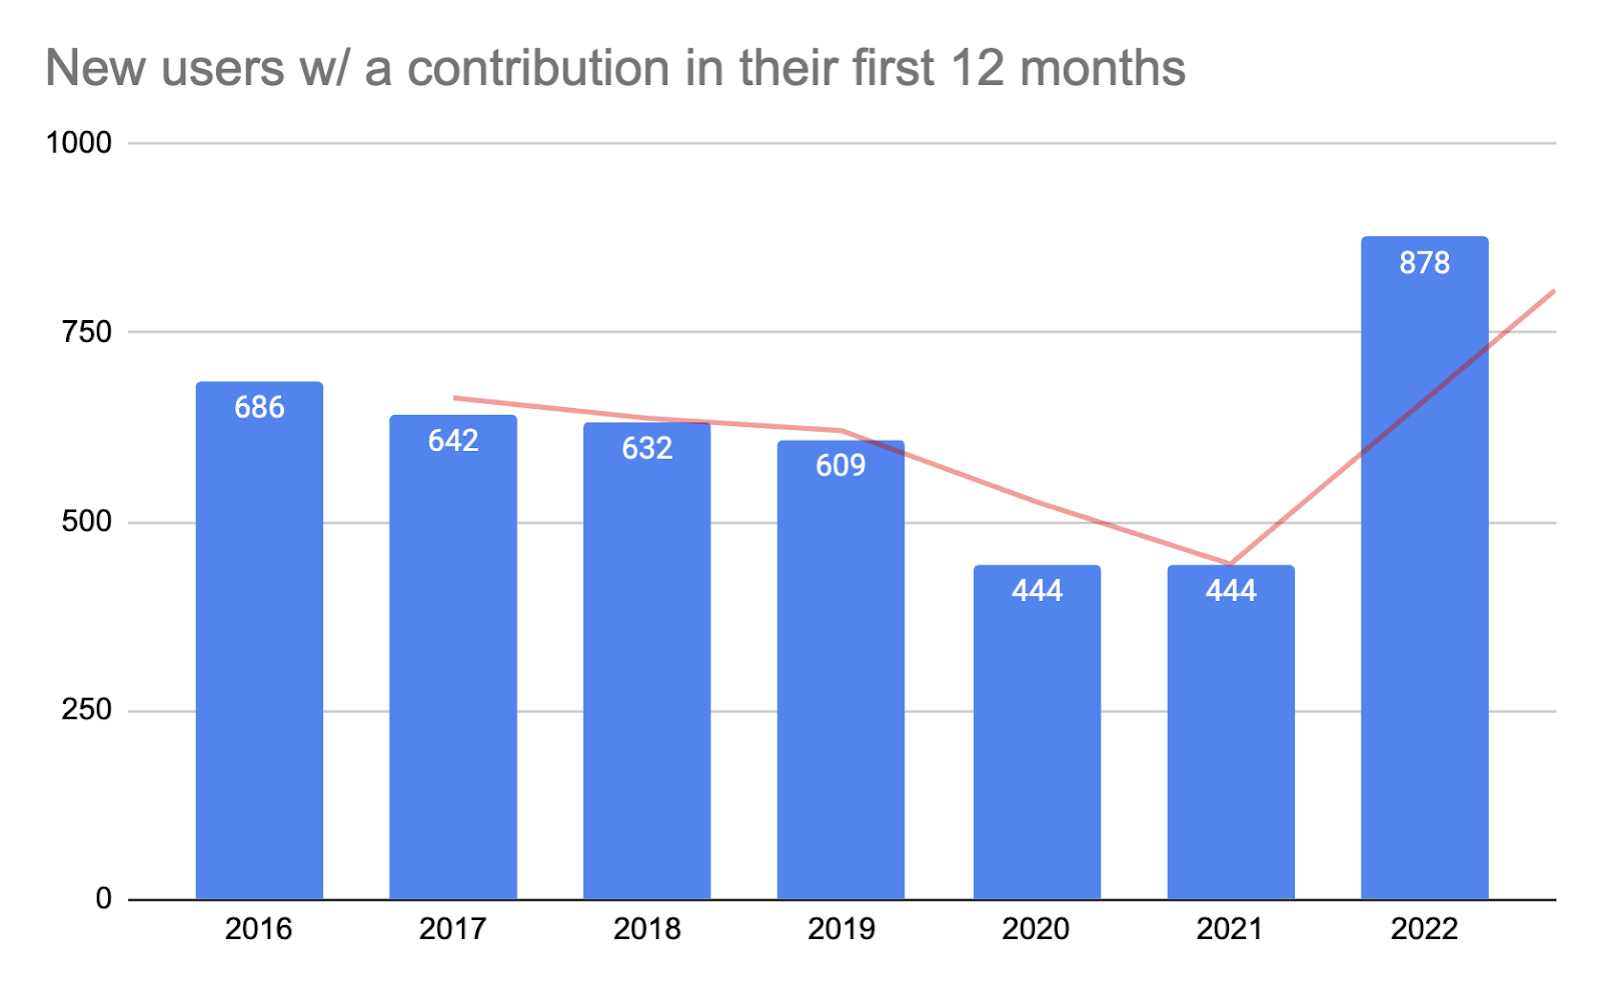 New users with a contribution in the first 12 months